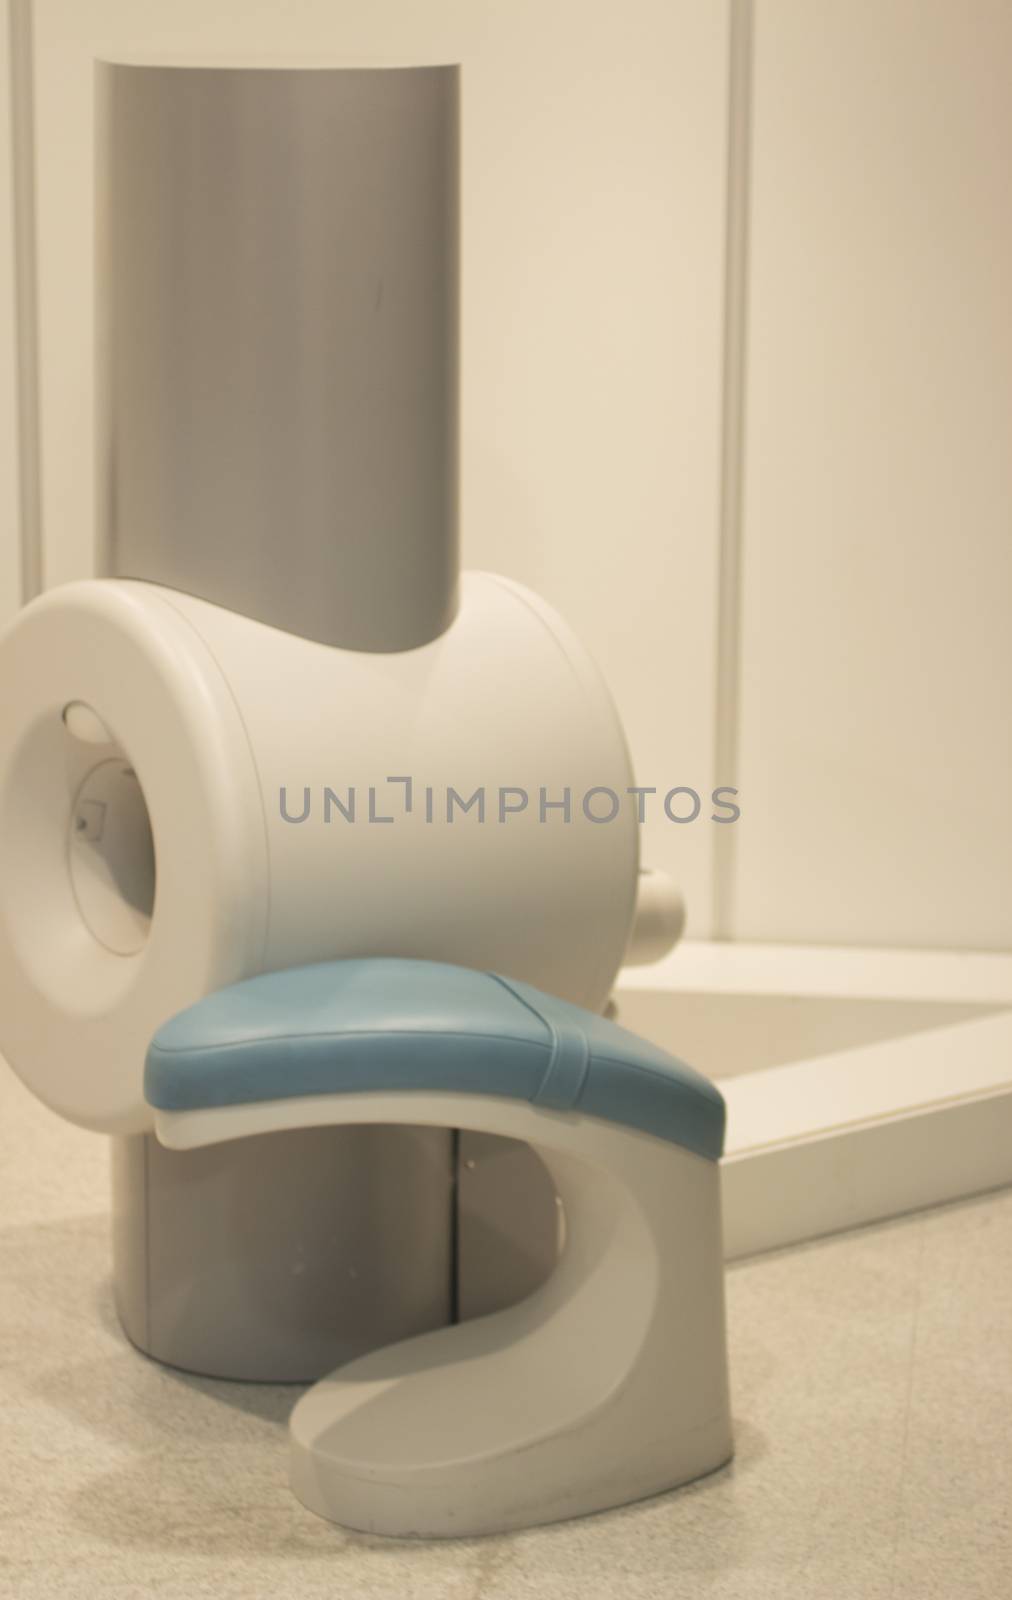 Fully Open High Field extremity scanning MRI Magnetic resonance imaging scanner for elbow, wrist, arm, thigh, calf, knee, ankle and foot scans and patient stool in the scan room of a hospital clinic.